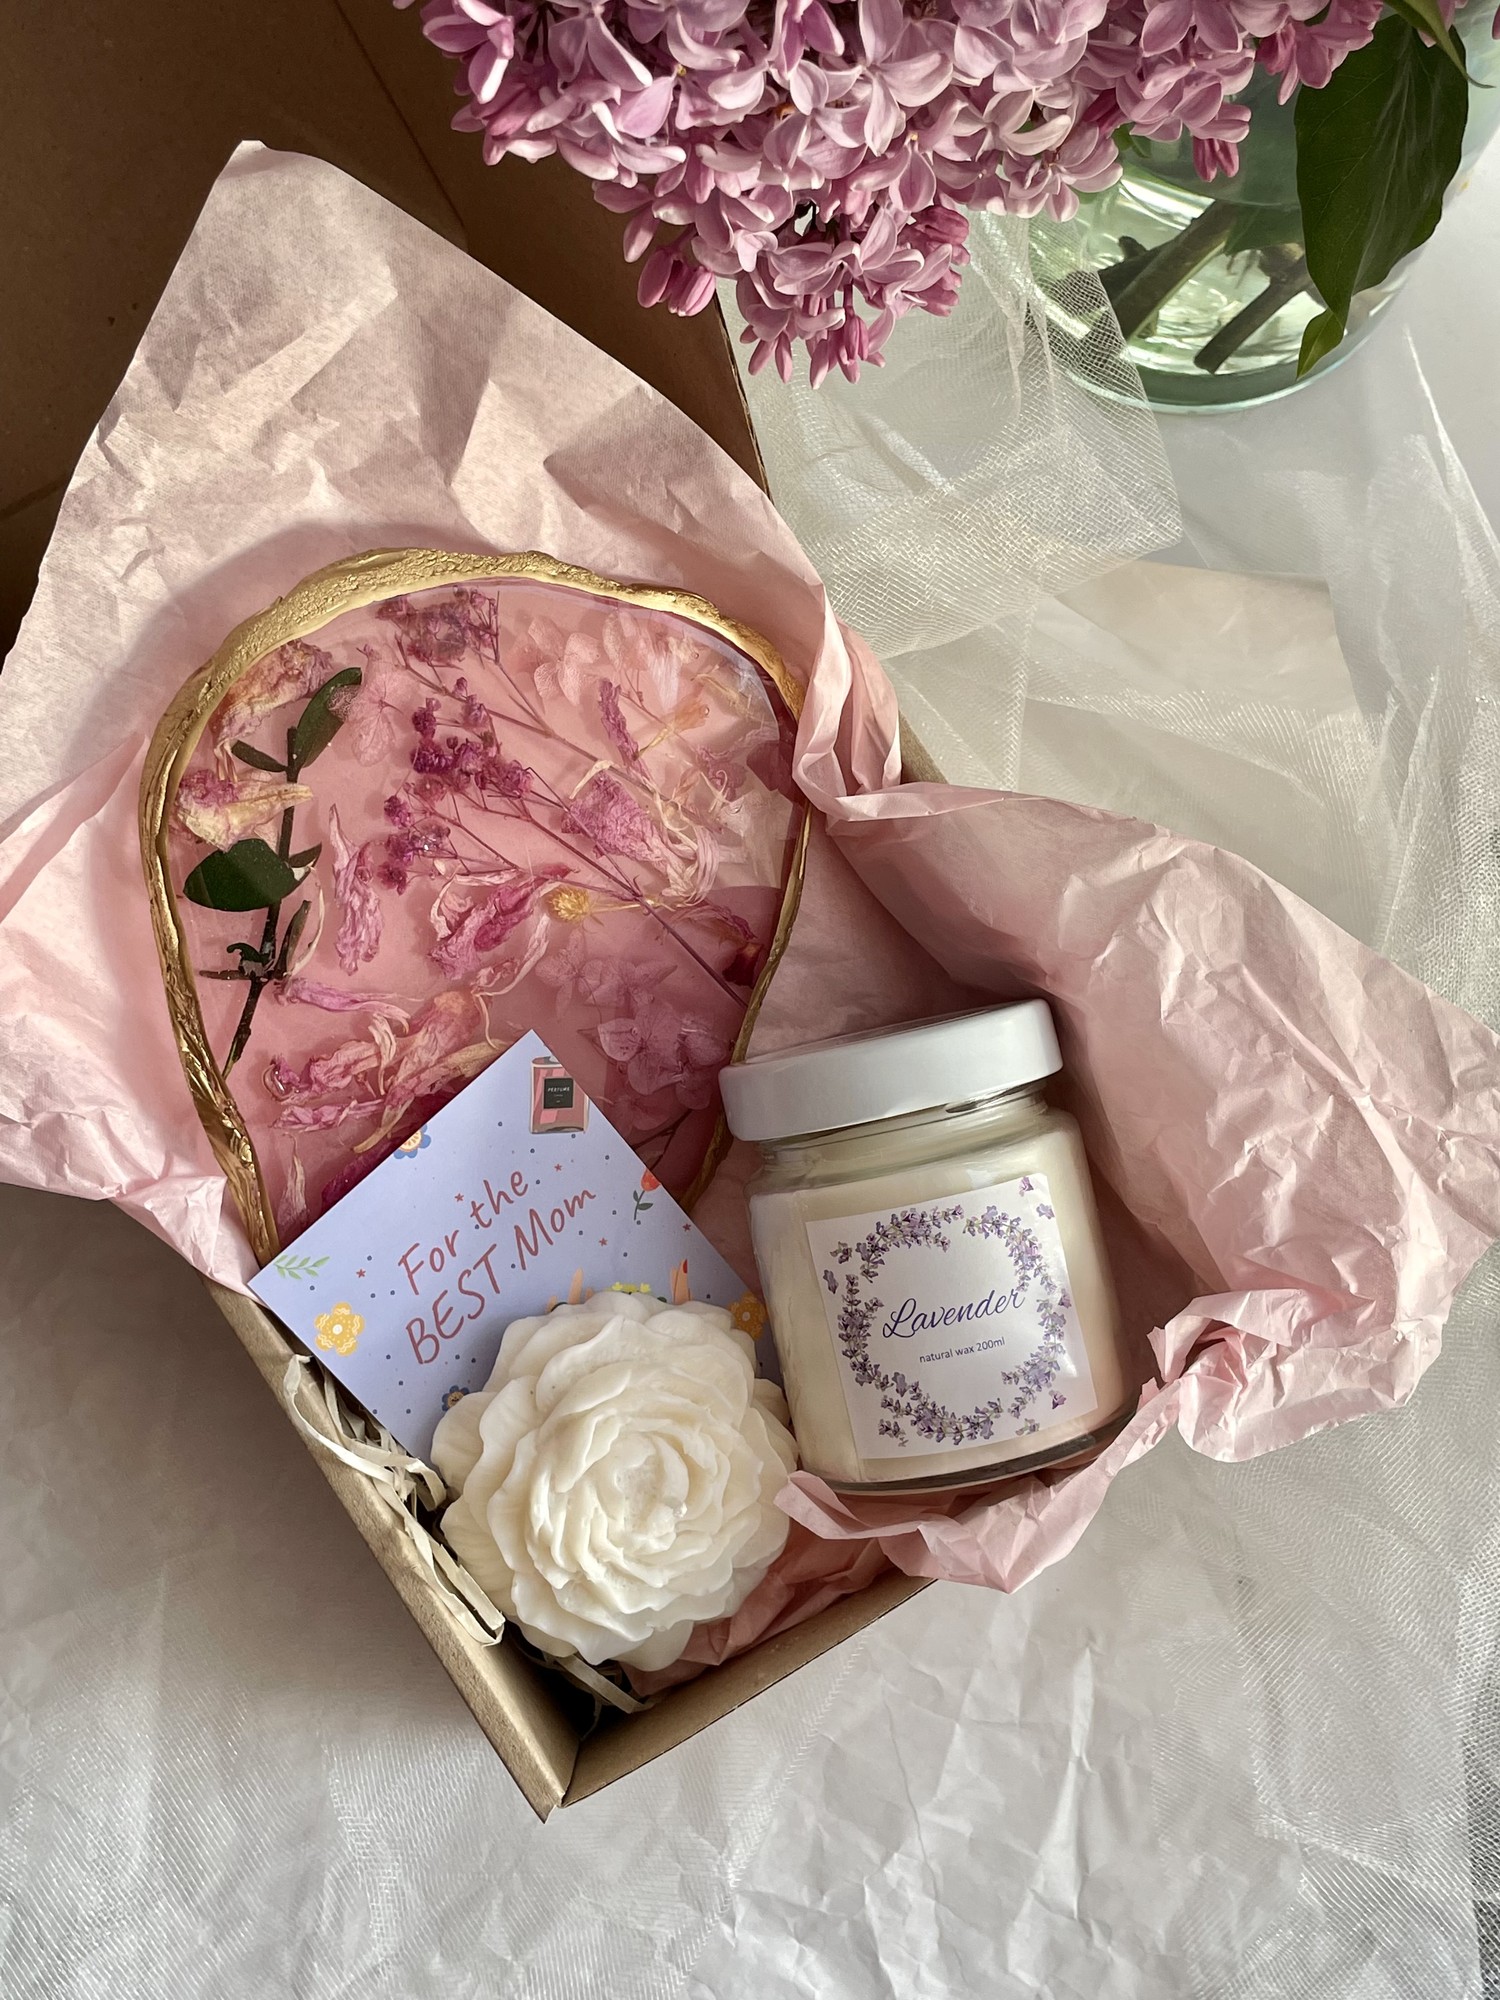 Gift set of candles